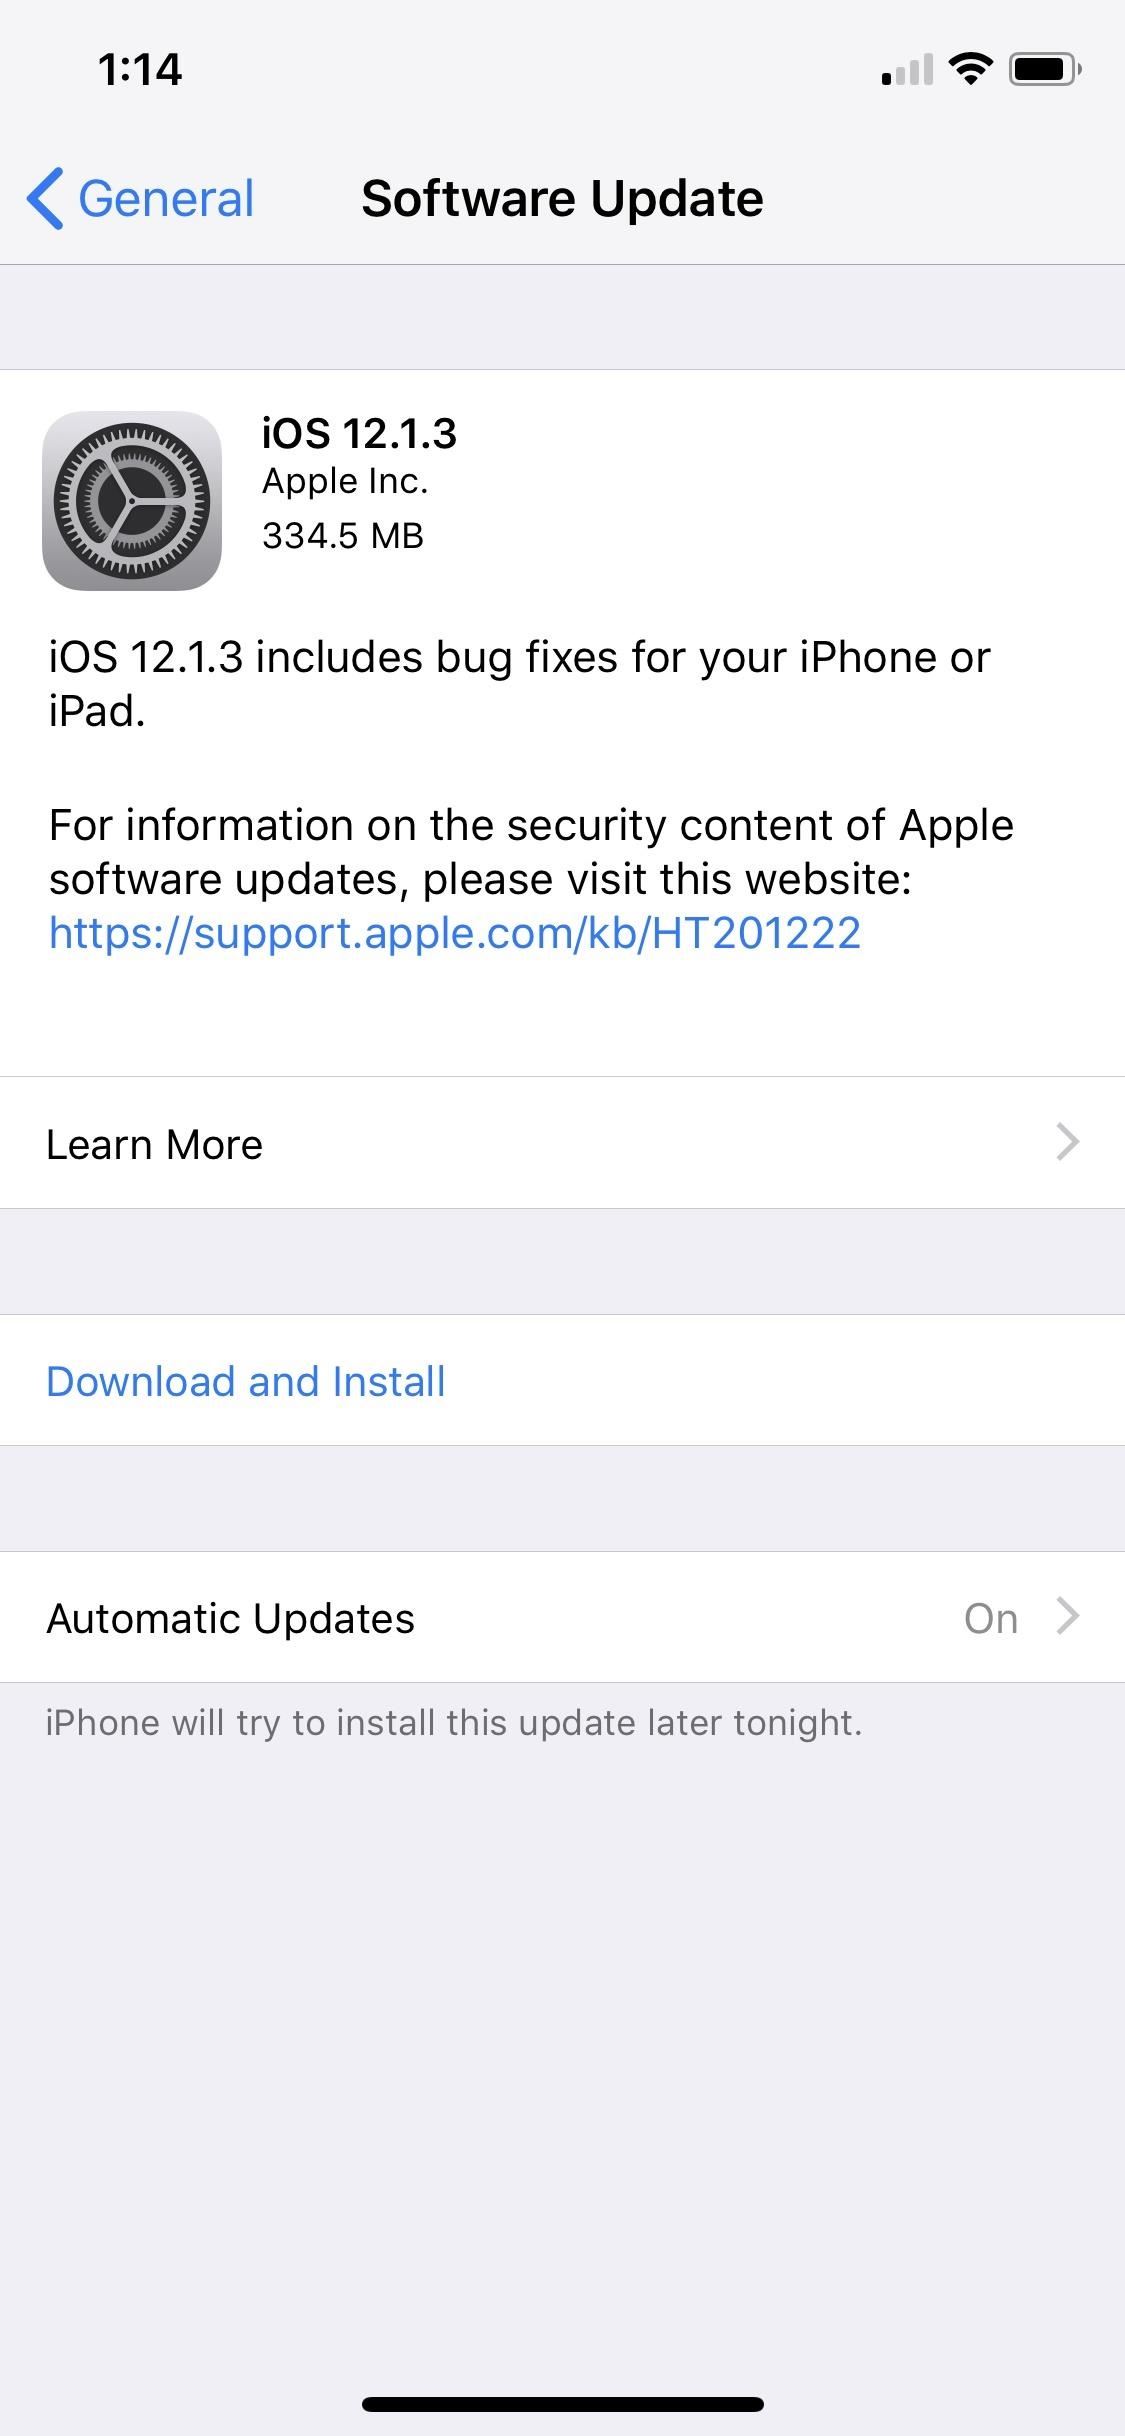 Apple Just Released iOS 12.1.3 for iPhones, Fixes Messages Bug, CarPlay Connectivity & More